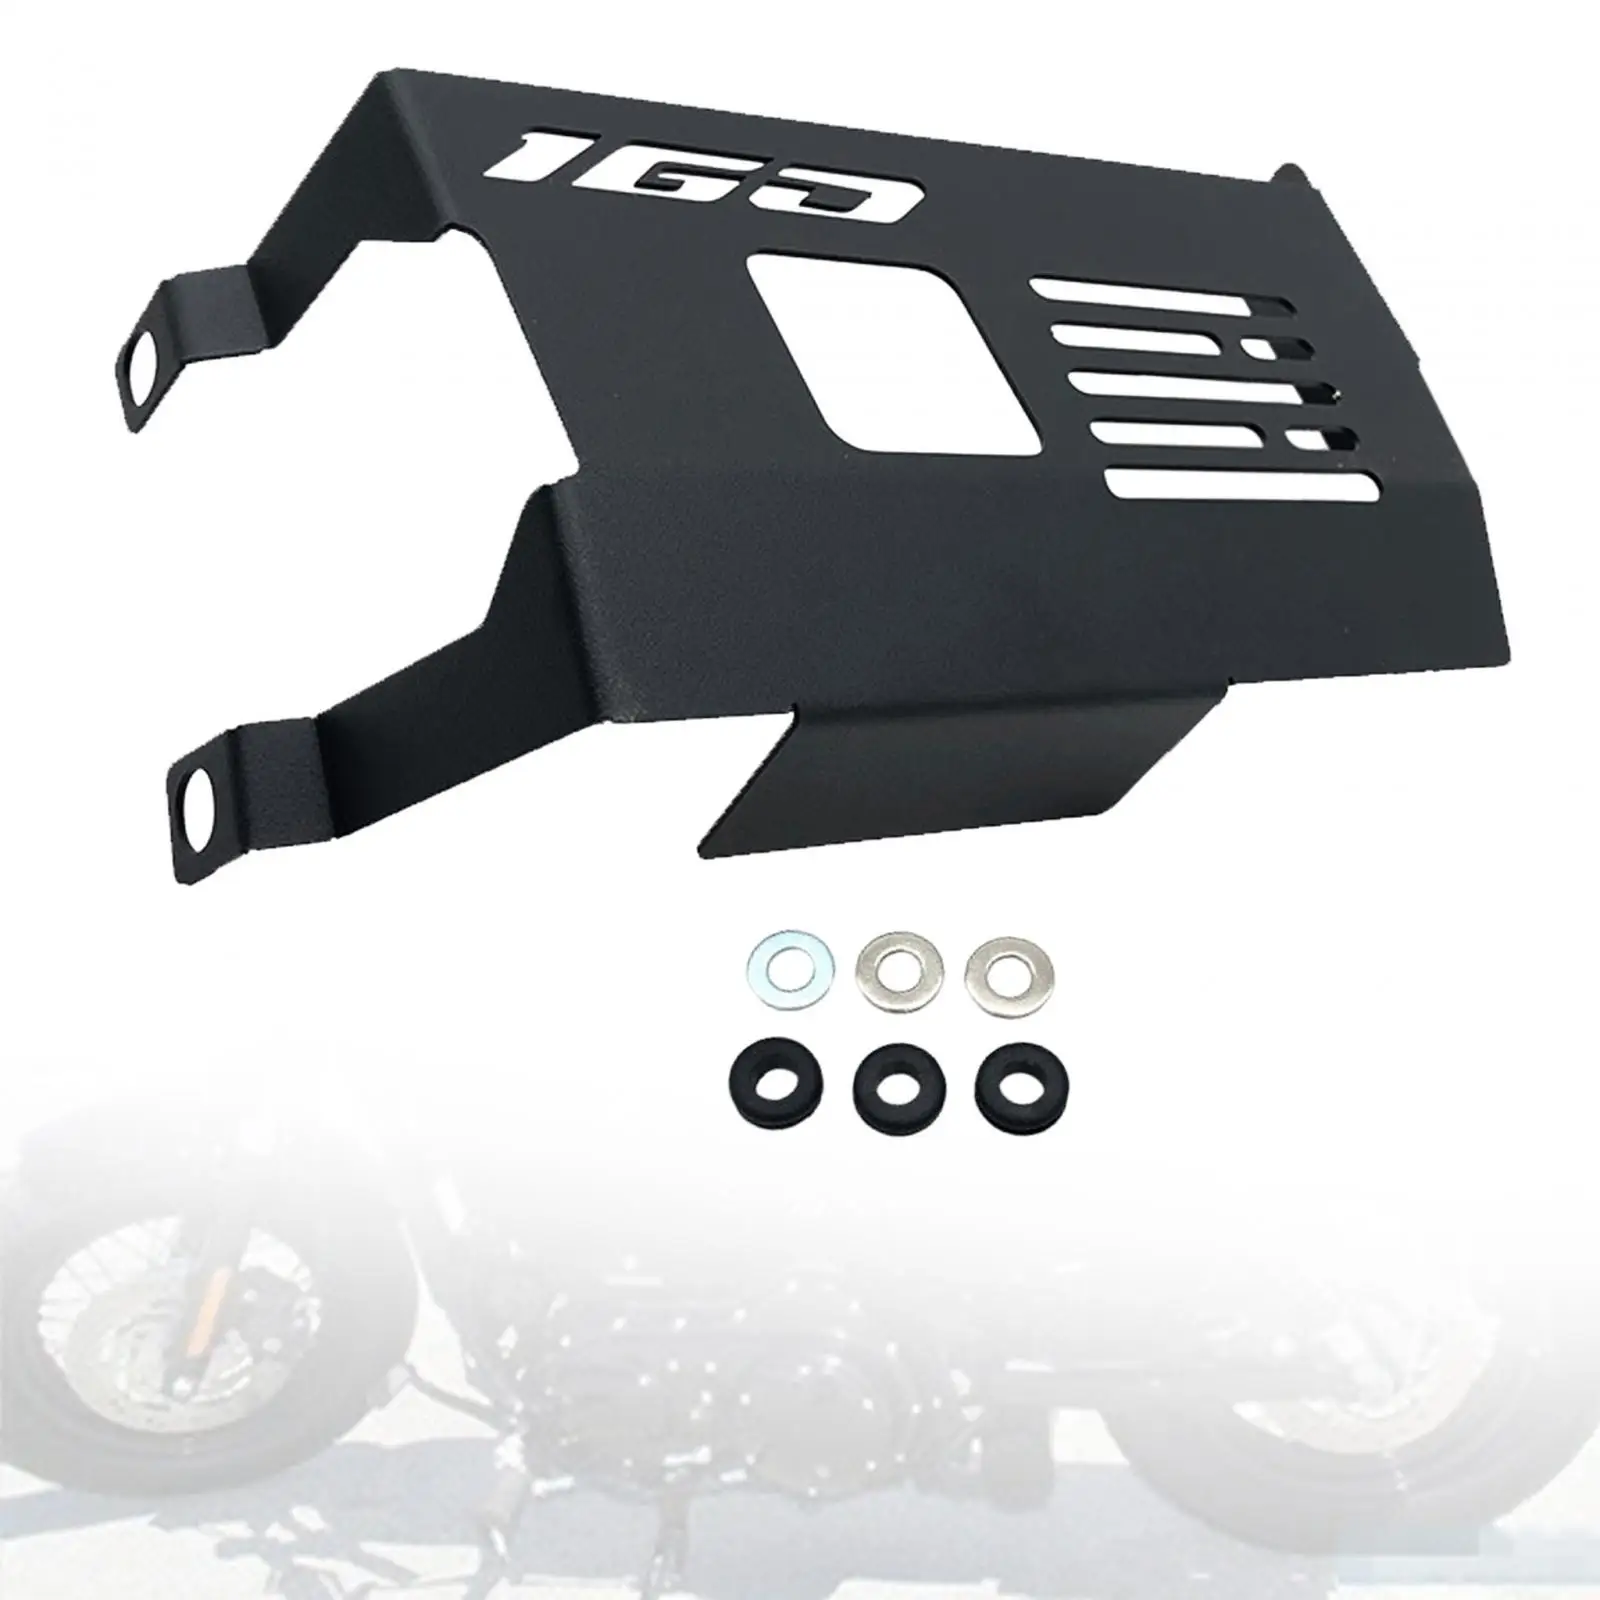 Motorcycle Engine Chassis Protection Guard Cover,Skid Plate Pan Protector Shell Motorcycle Engine Protector Protective Covers